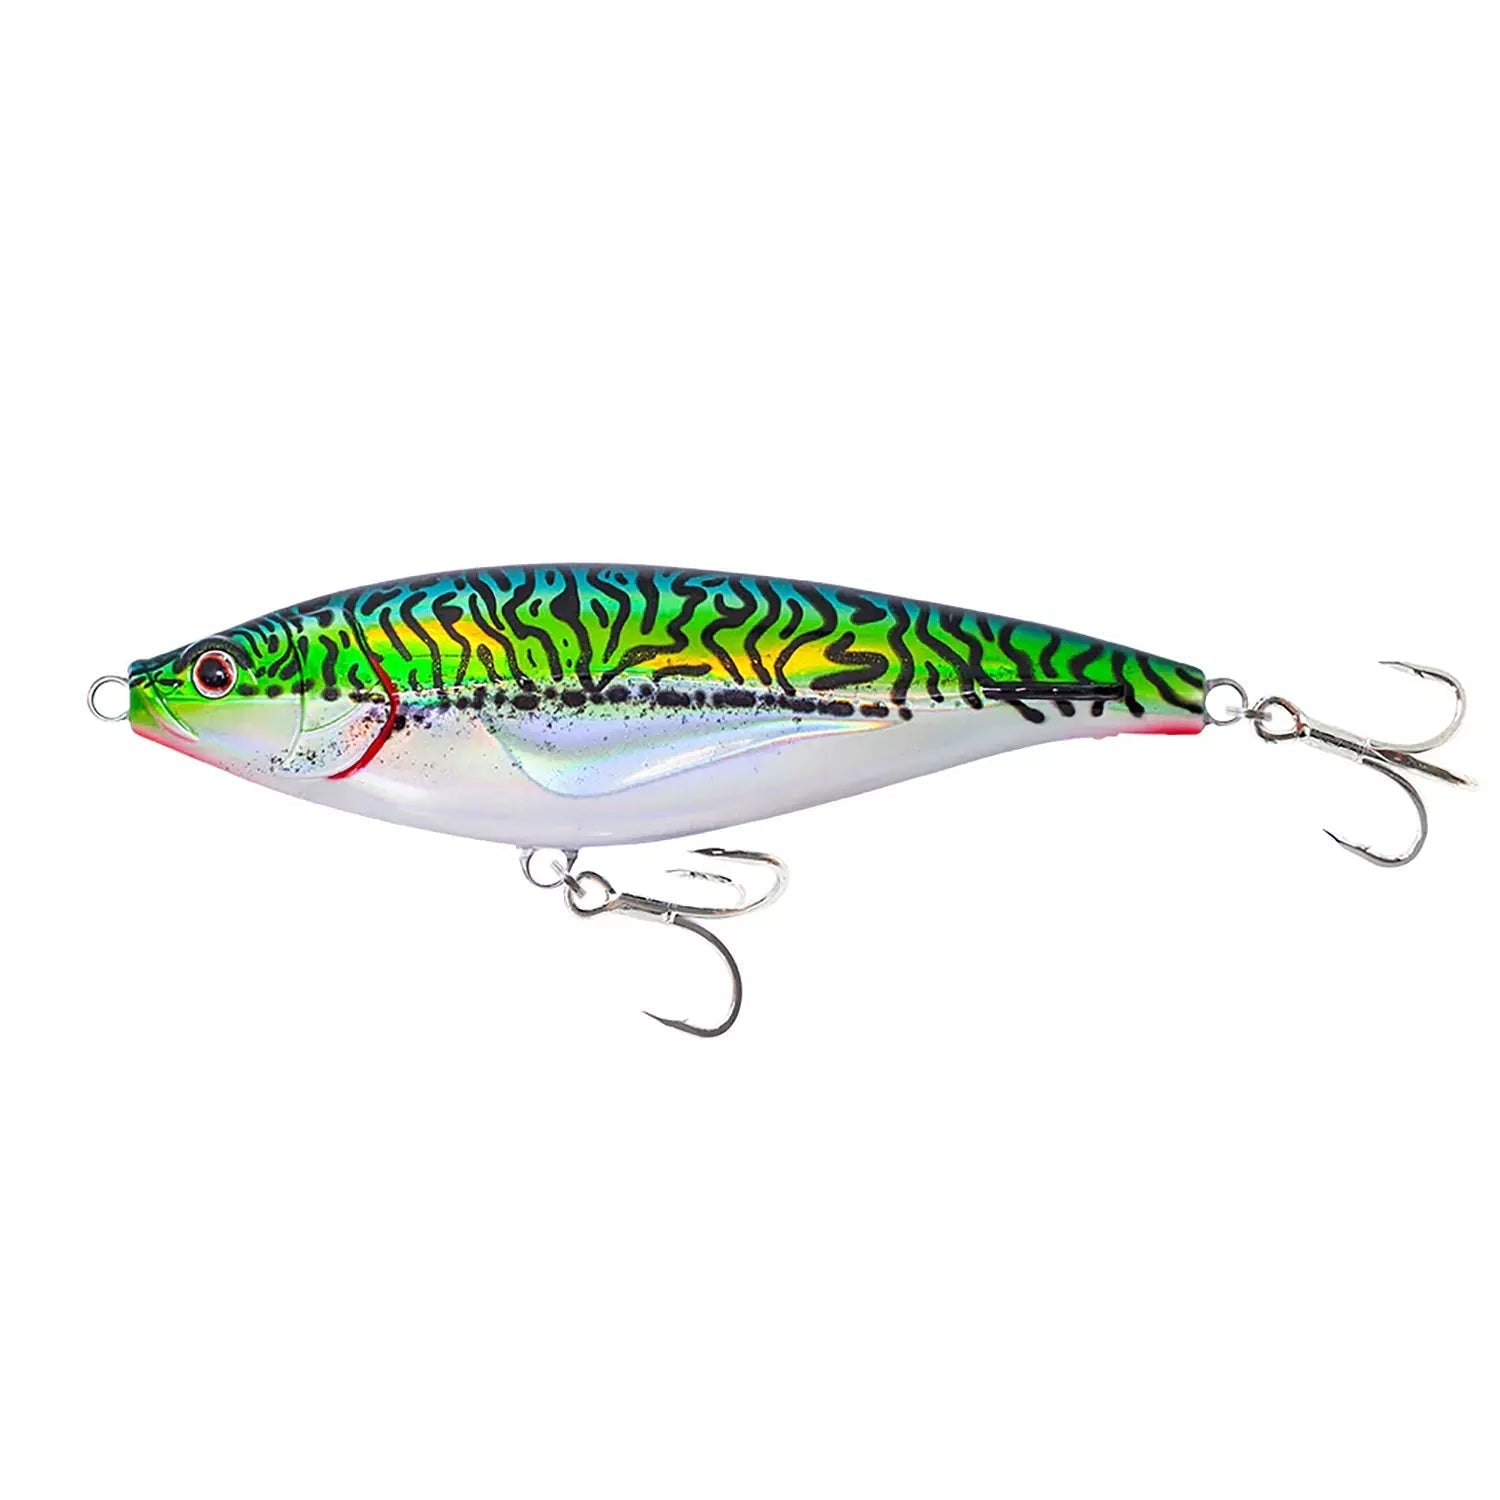 Nomad Design Madscad-Lure - Poppers, Stickbaits & Pencils-Nomad-95mm-Silver Green Mackerel-Fishing Station